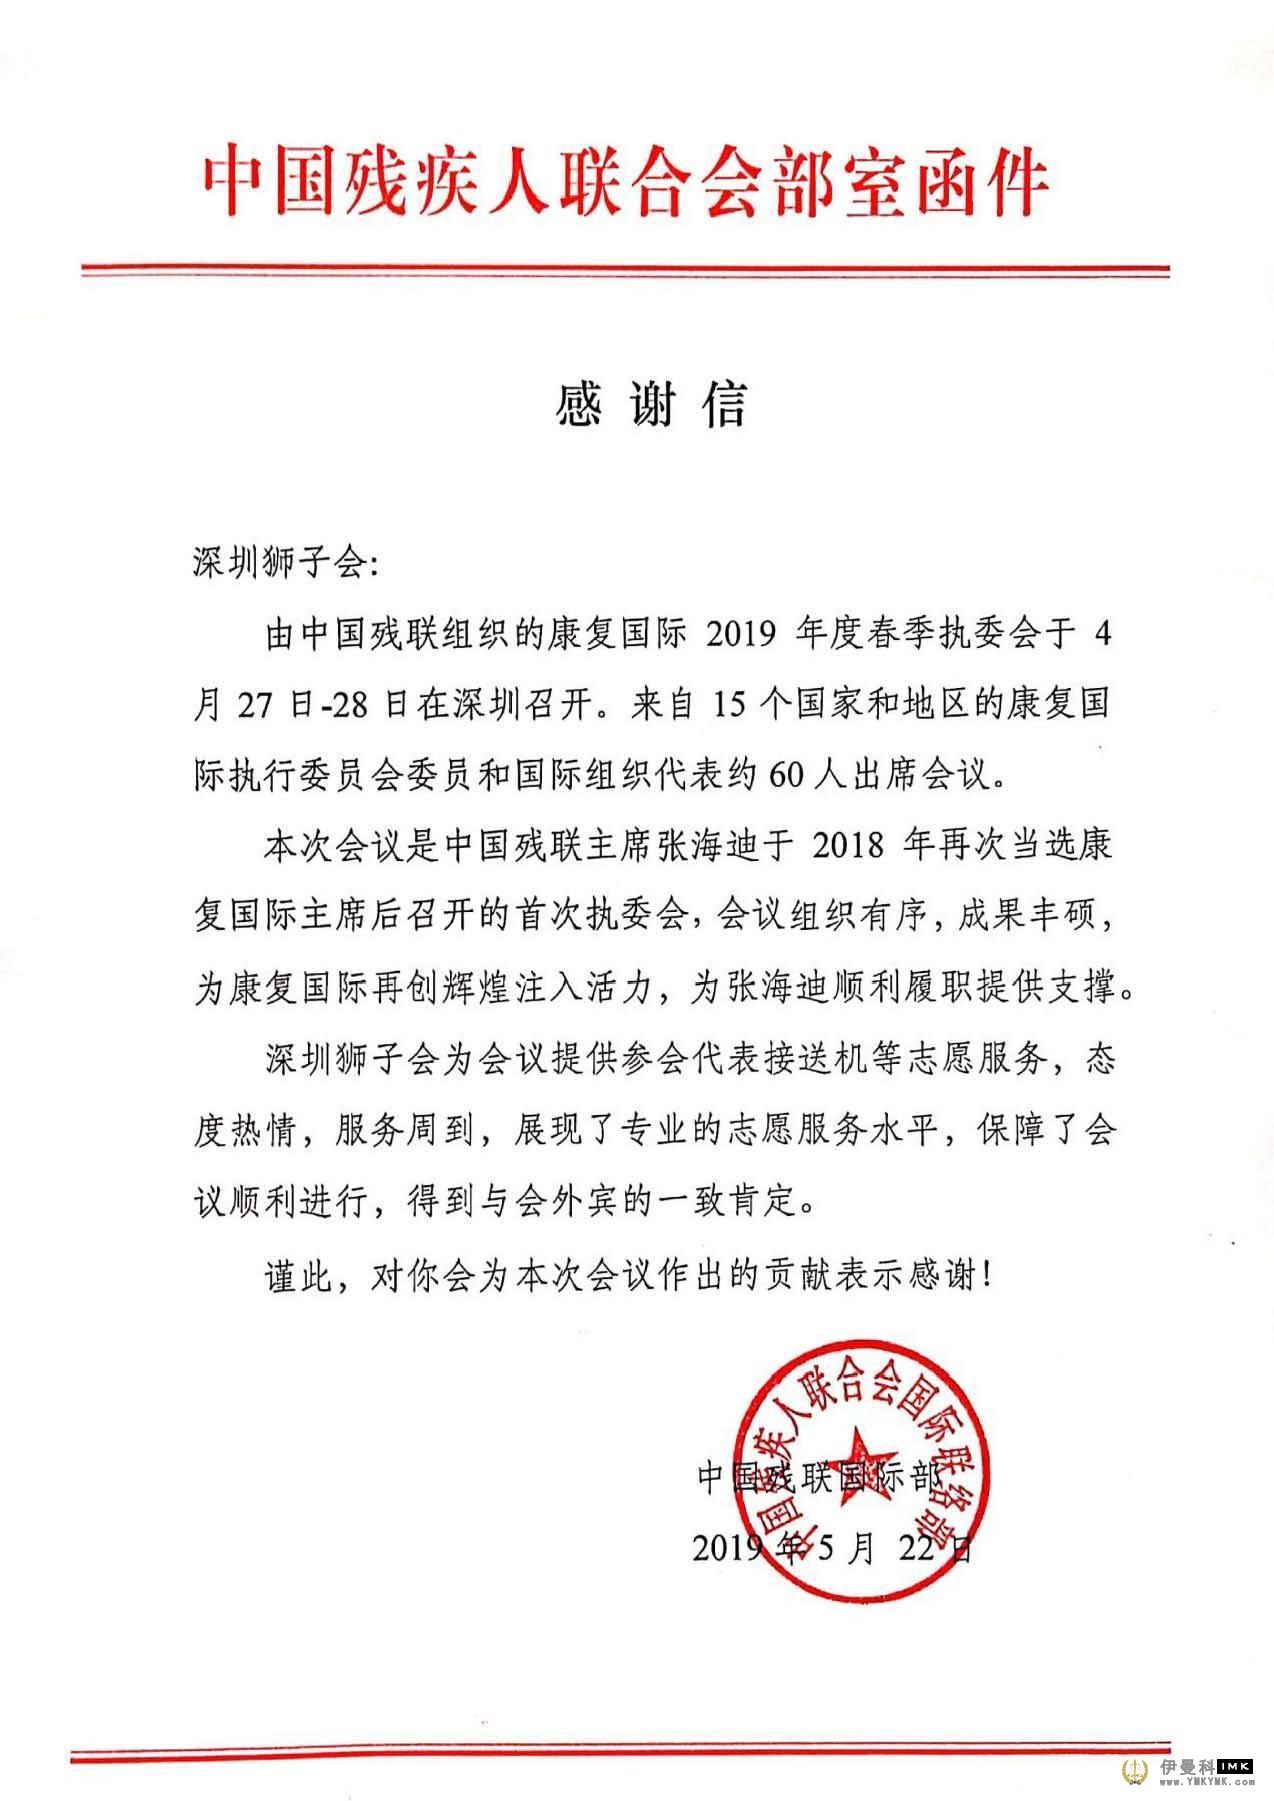 Thank you letter from Shenzhen Lions Club